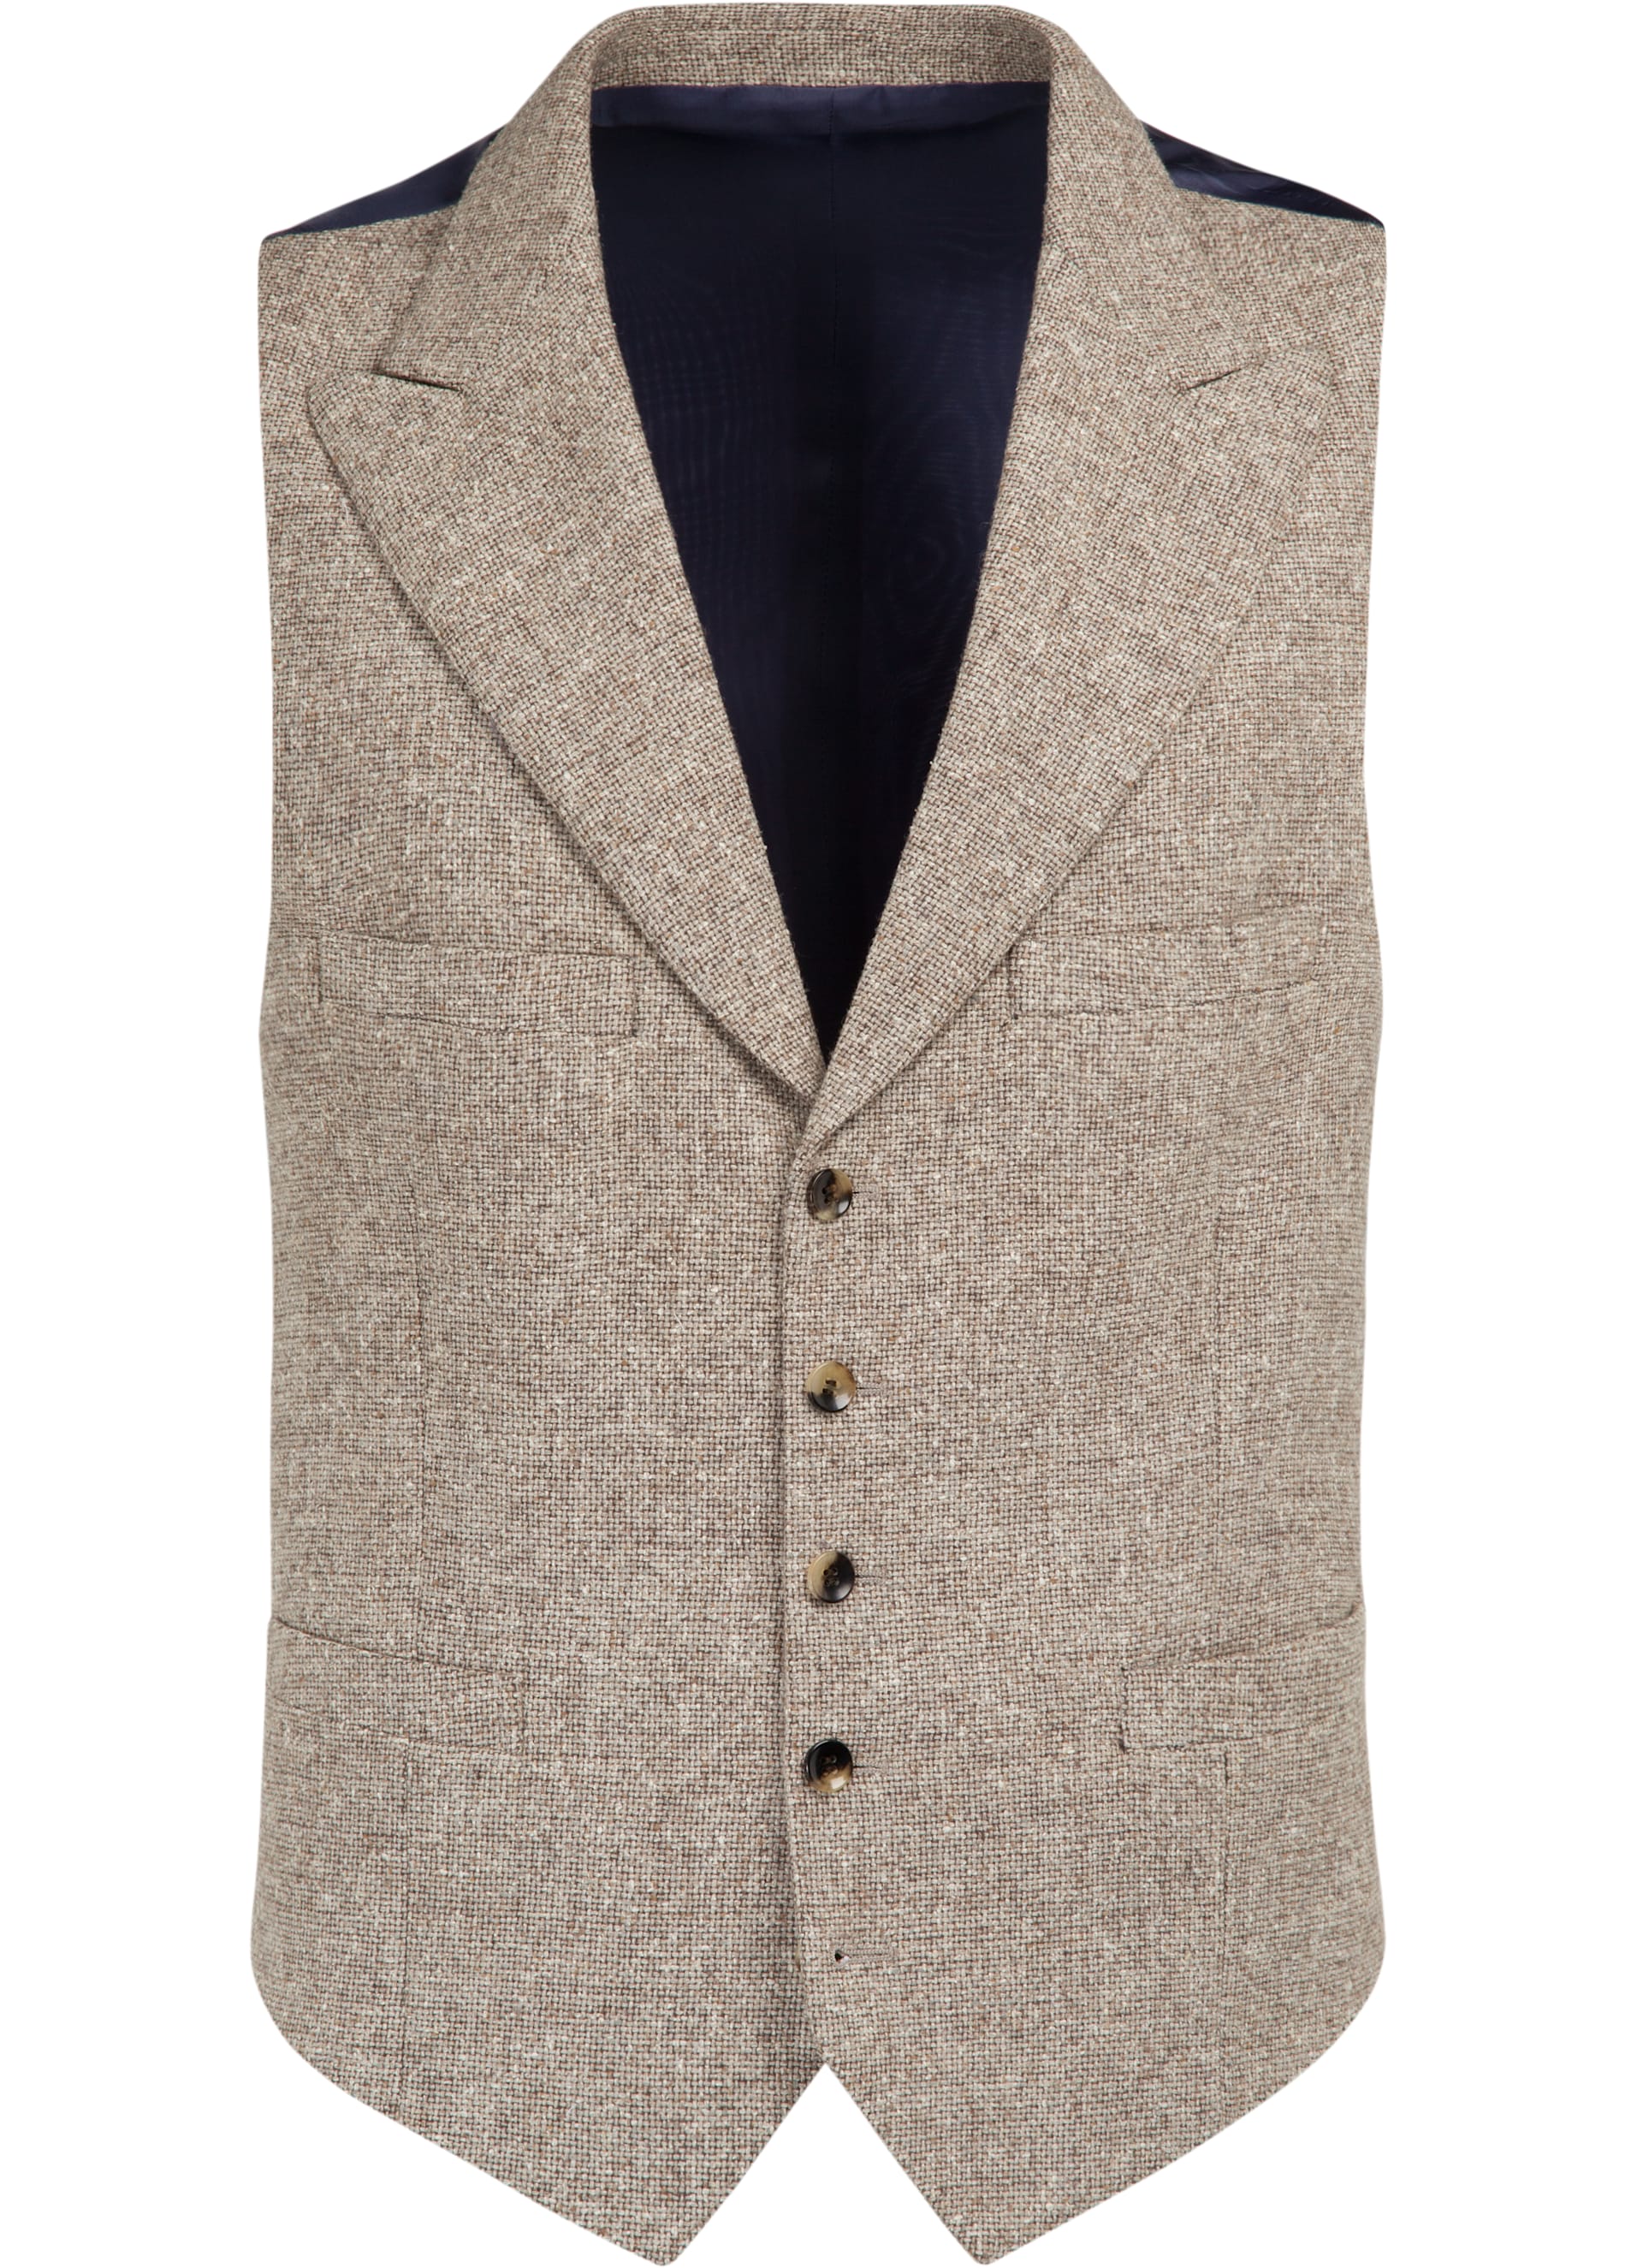 Light Brown Waistcoat W170207i | Suitsupply Online Store